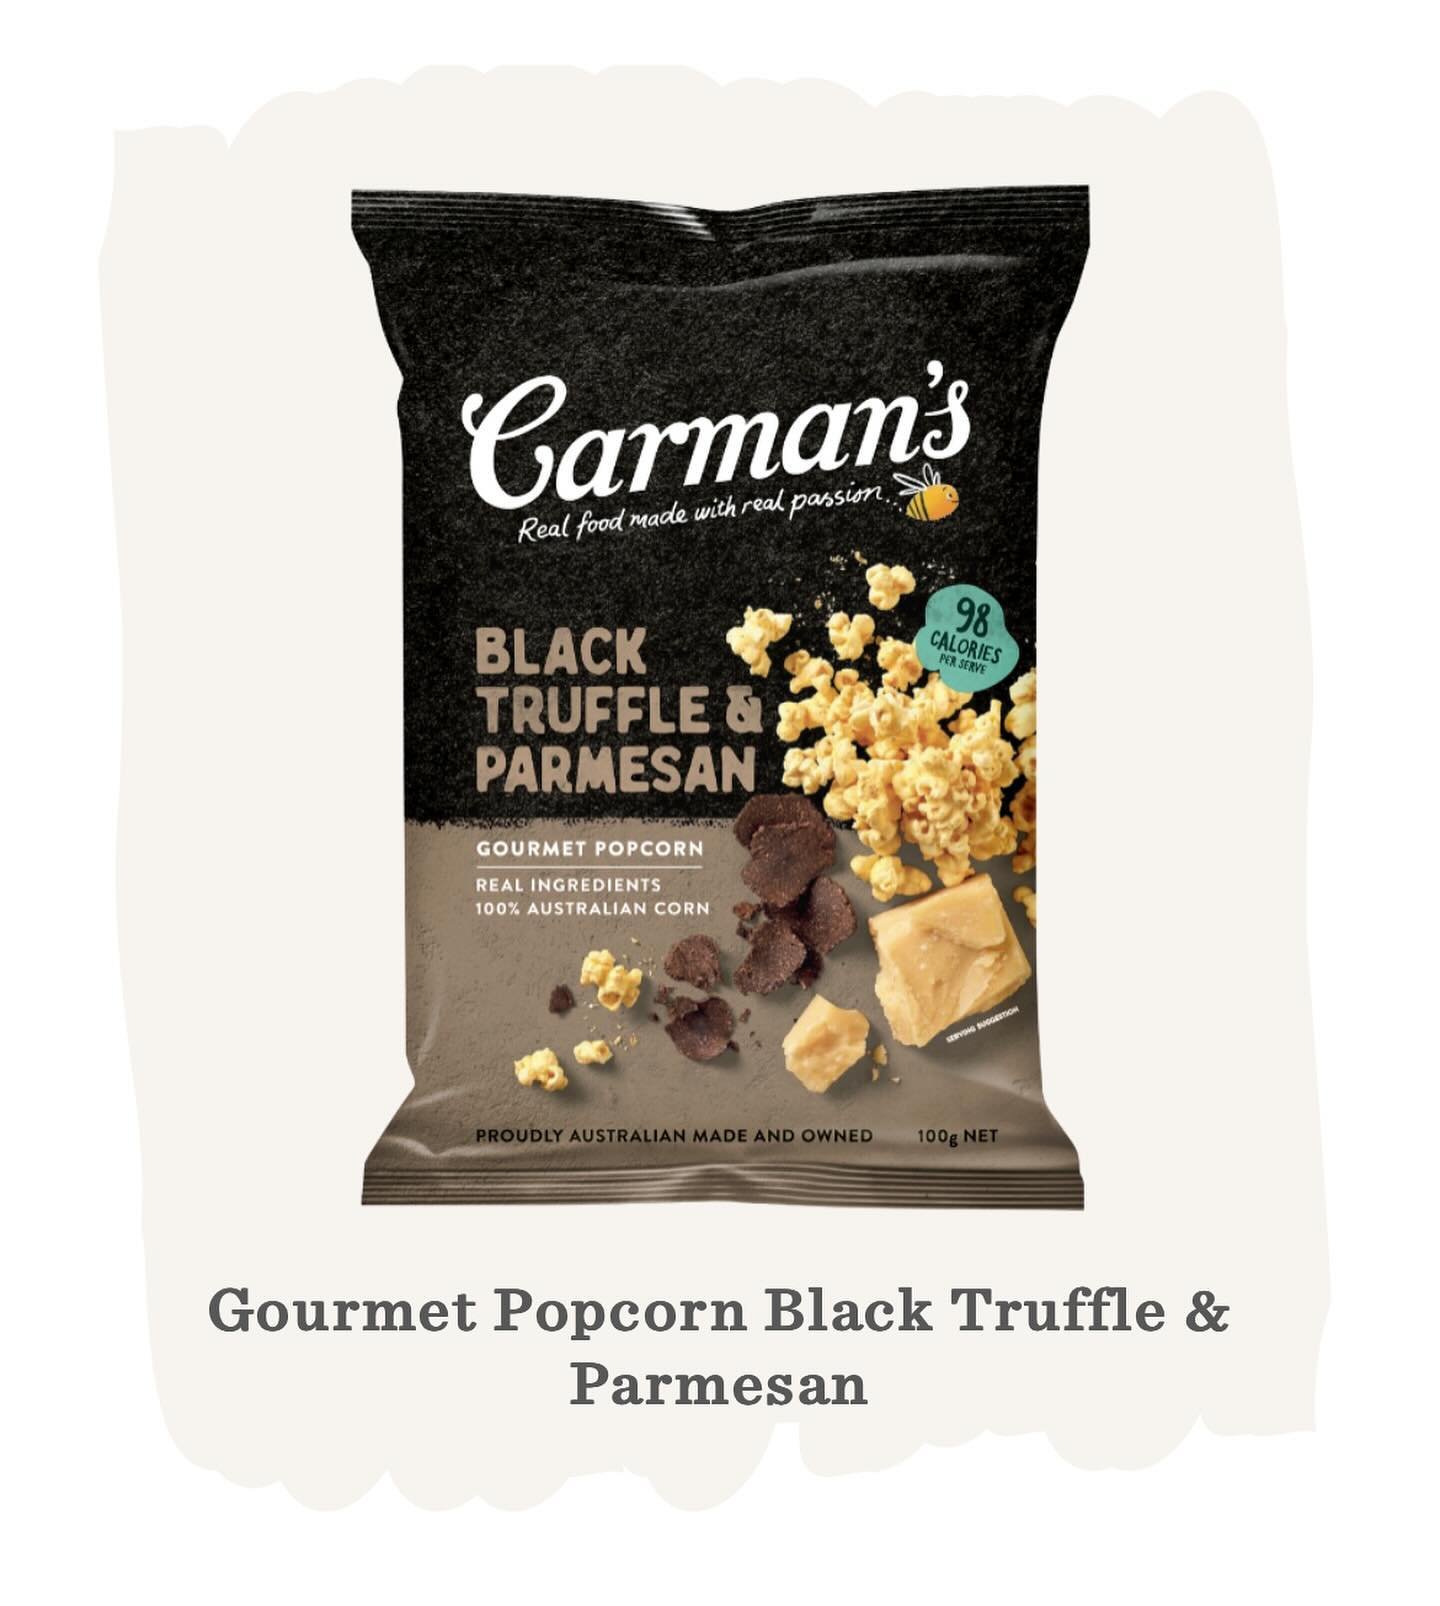 Keep an eye out for these new fun popcorn flavours. Available at Coles #carmanskitchen #snack #popcorn #newproduct